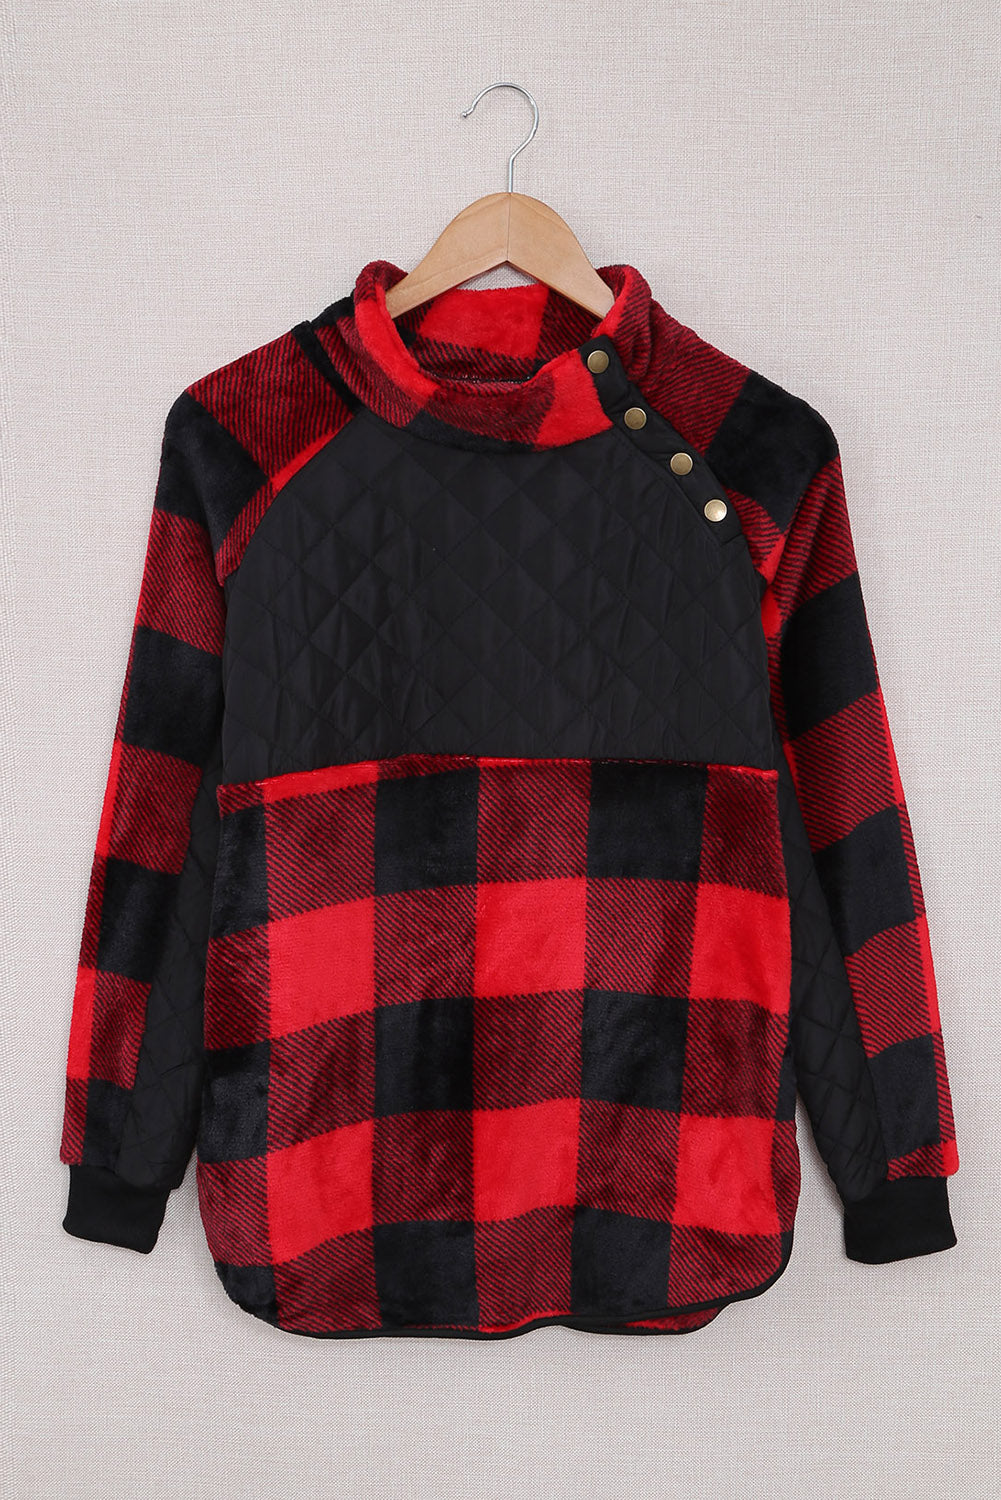 Red Plaid Patchwork Casual Button Quilted Sweatshirt